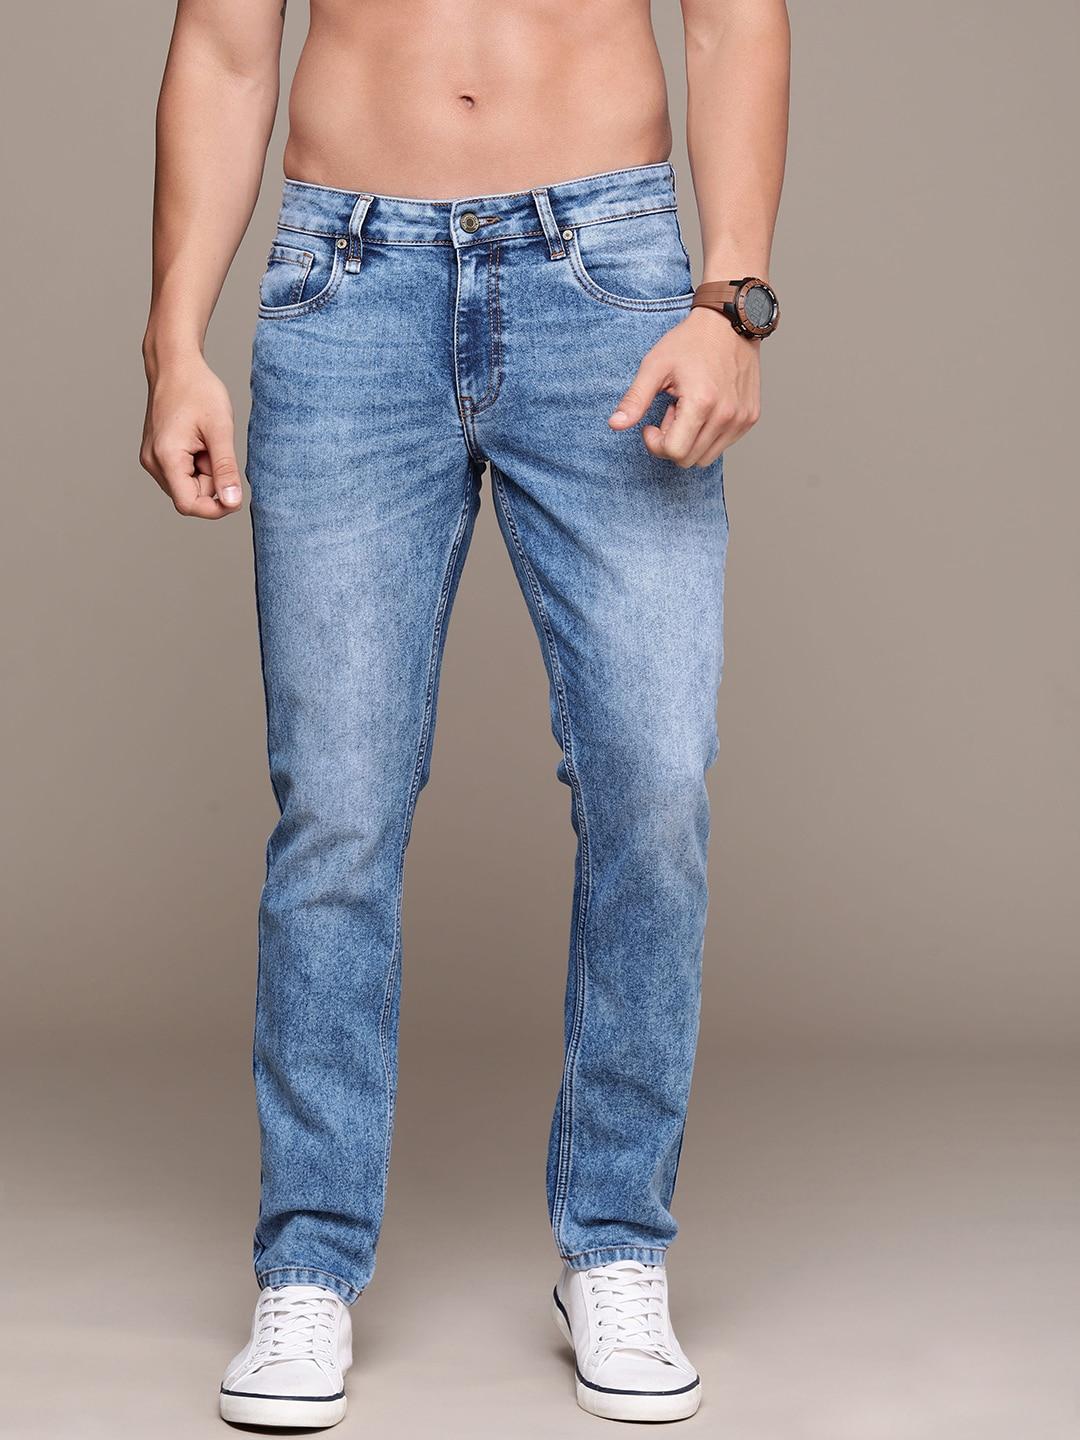 the-roadster-lifestyle-co.-men-slim-fit-heavy-fade-stretchable-jeans